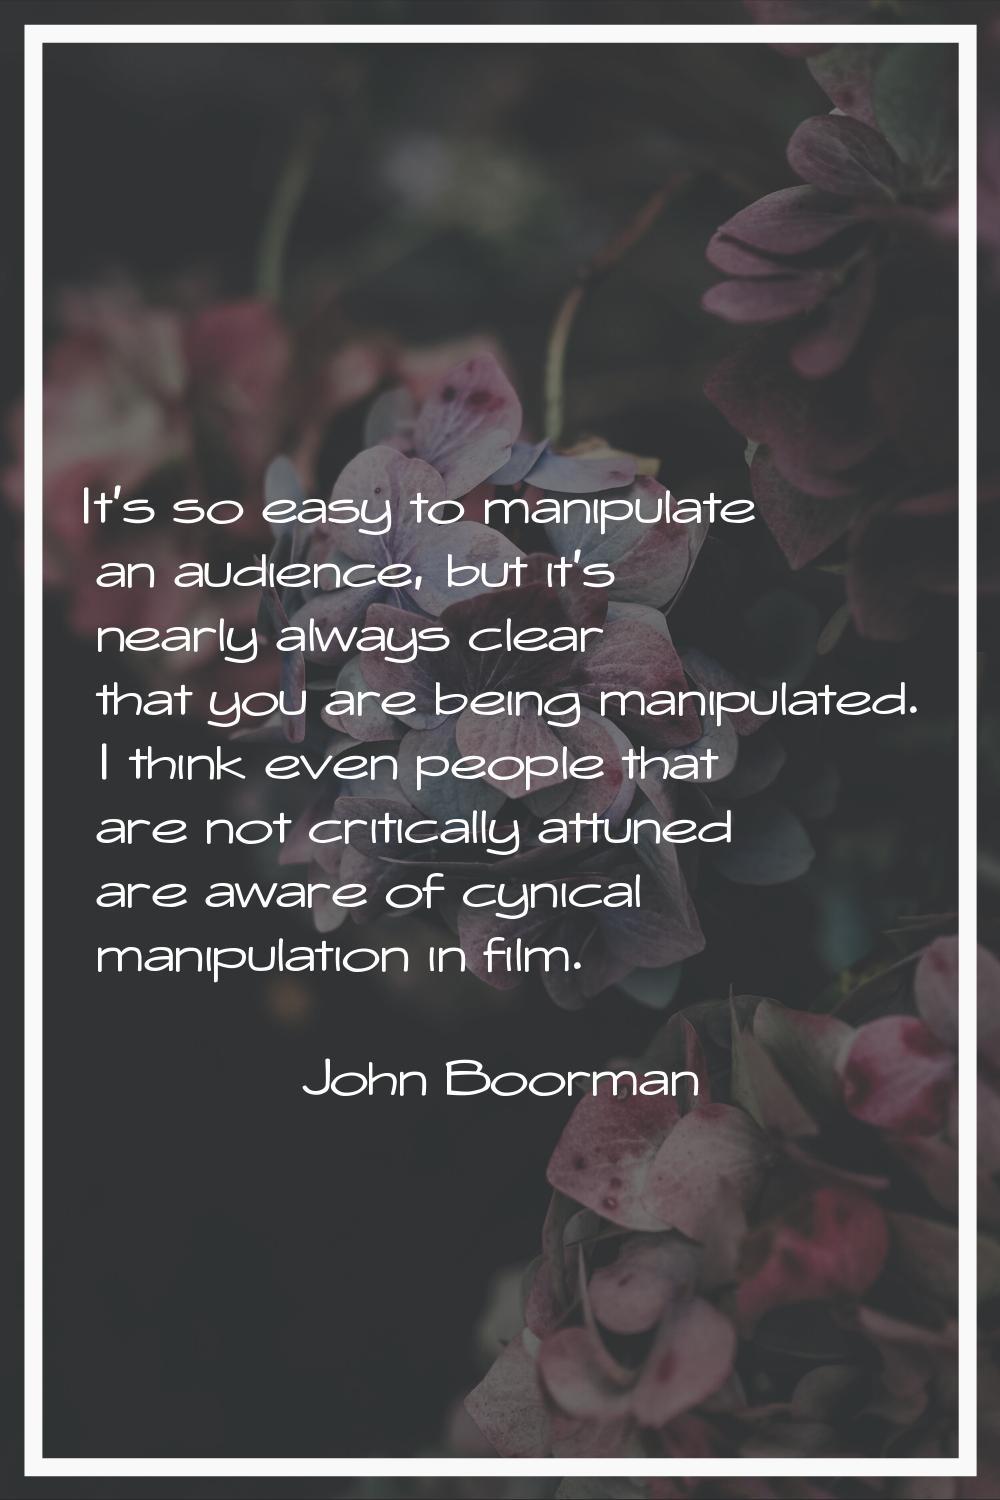 It's so easy to manipulate an audience, but it's nearly always clear that you are being manipulated